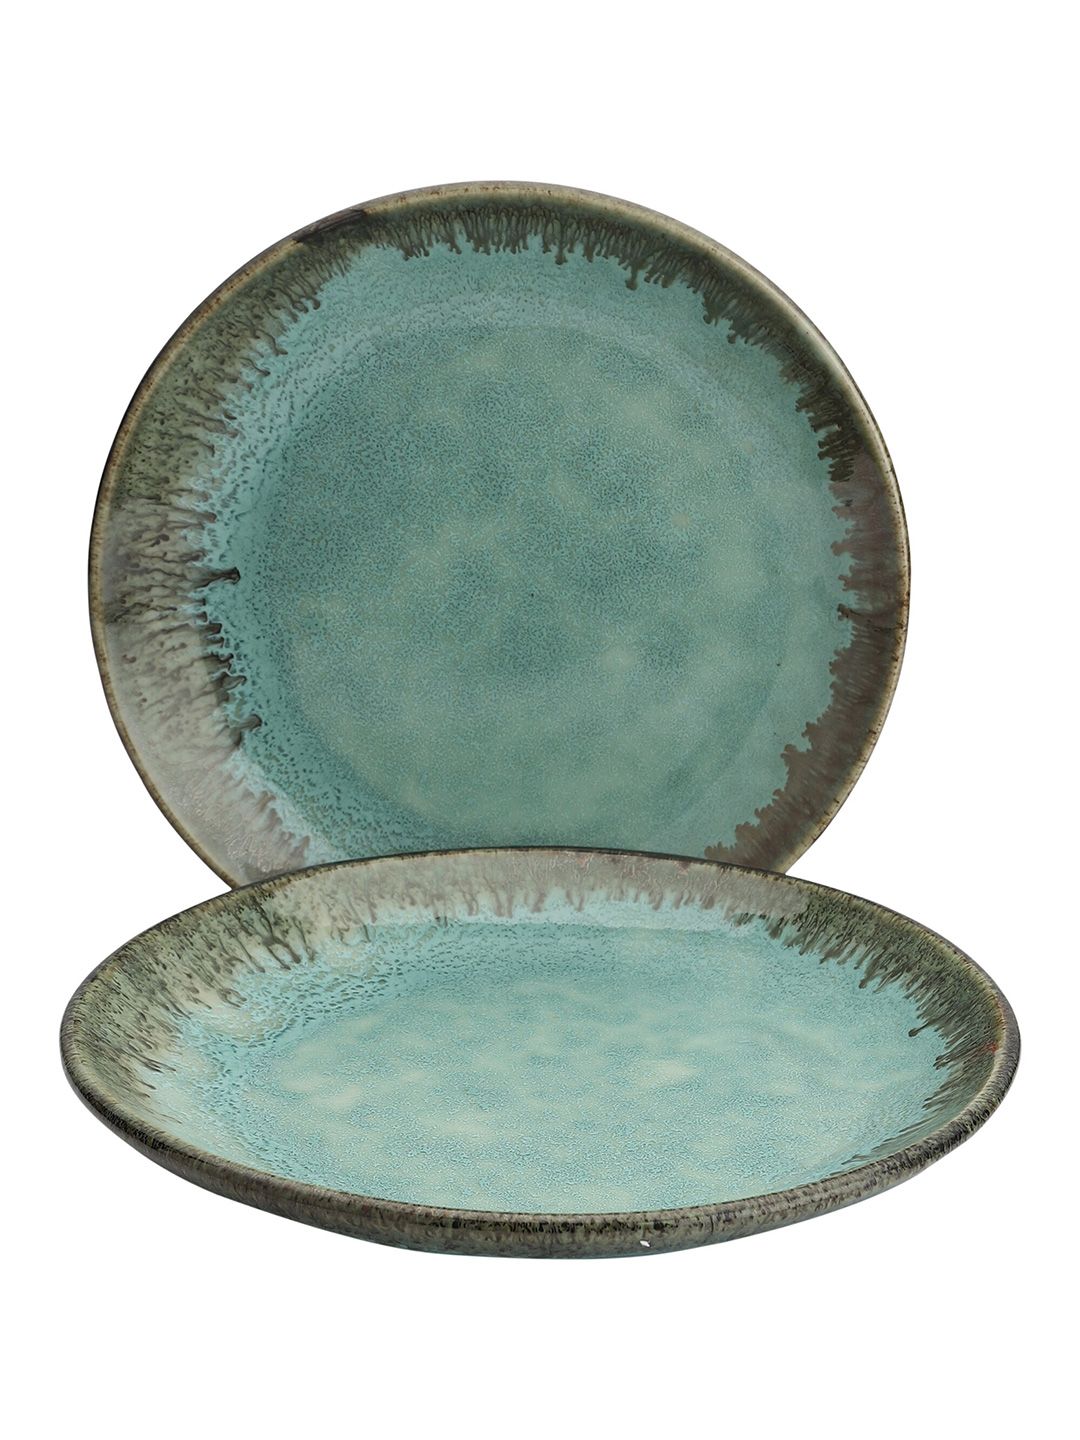 MIAH Decor Green 2 Pieces Handcrafted Textured Ceramic Glossy Plates Price in India